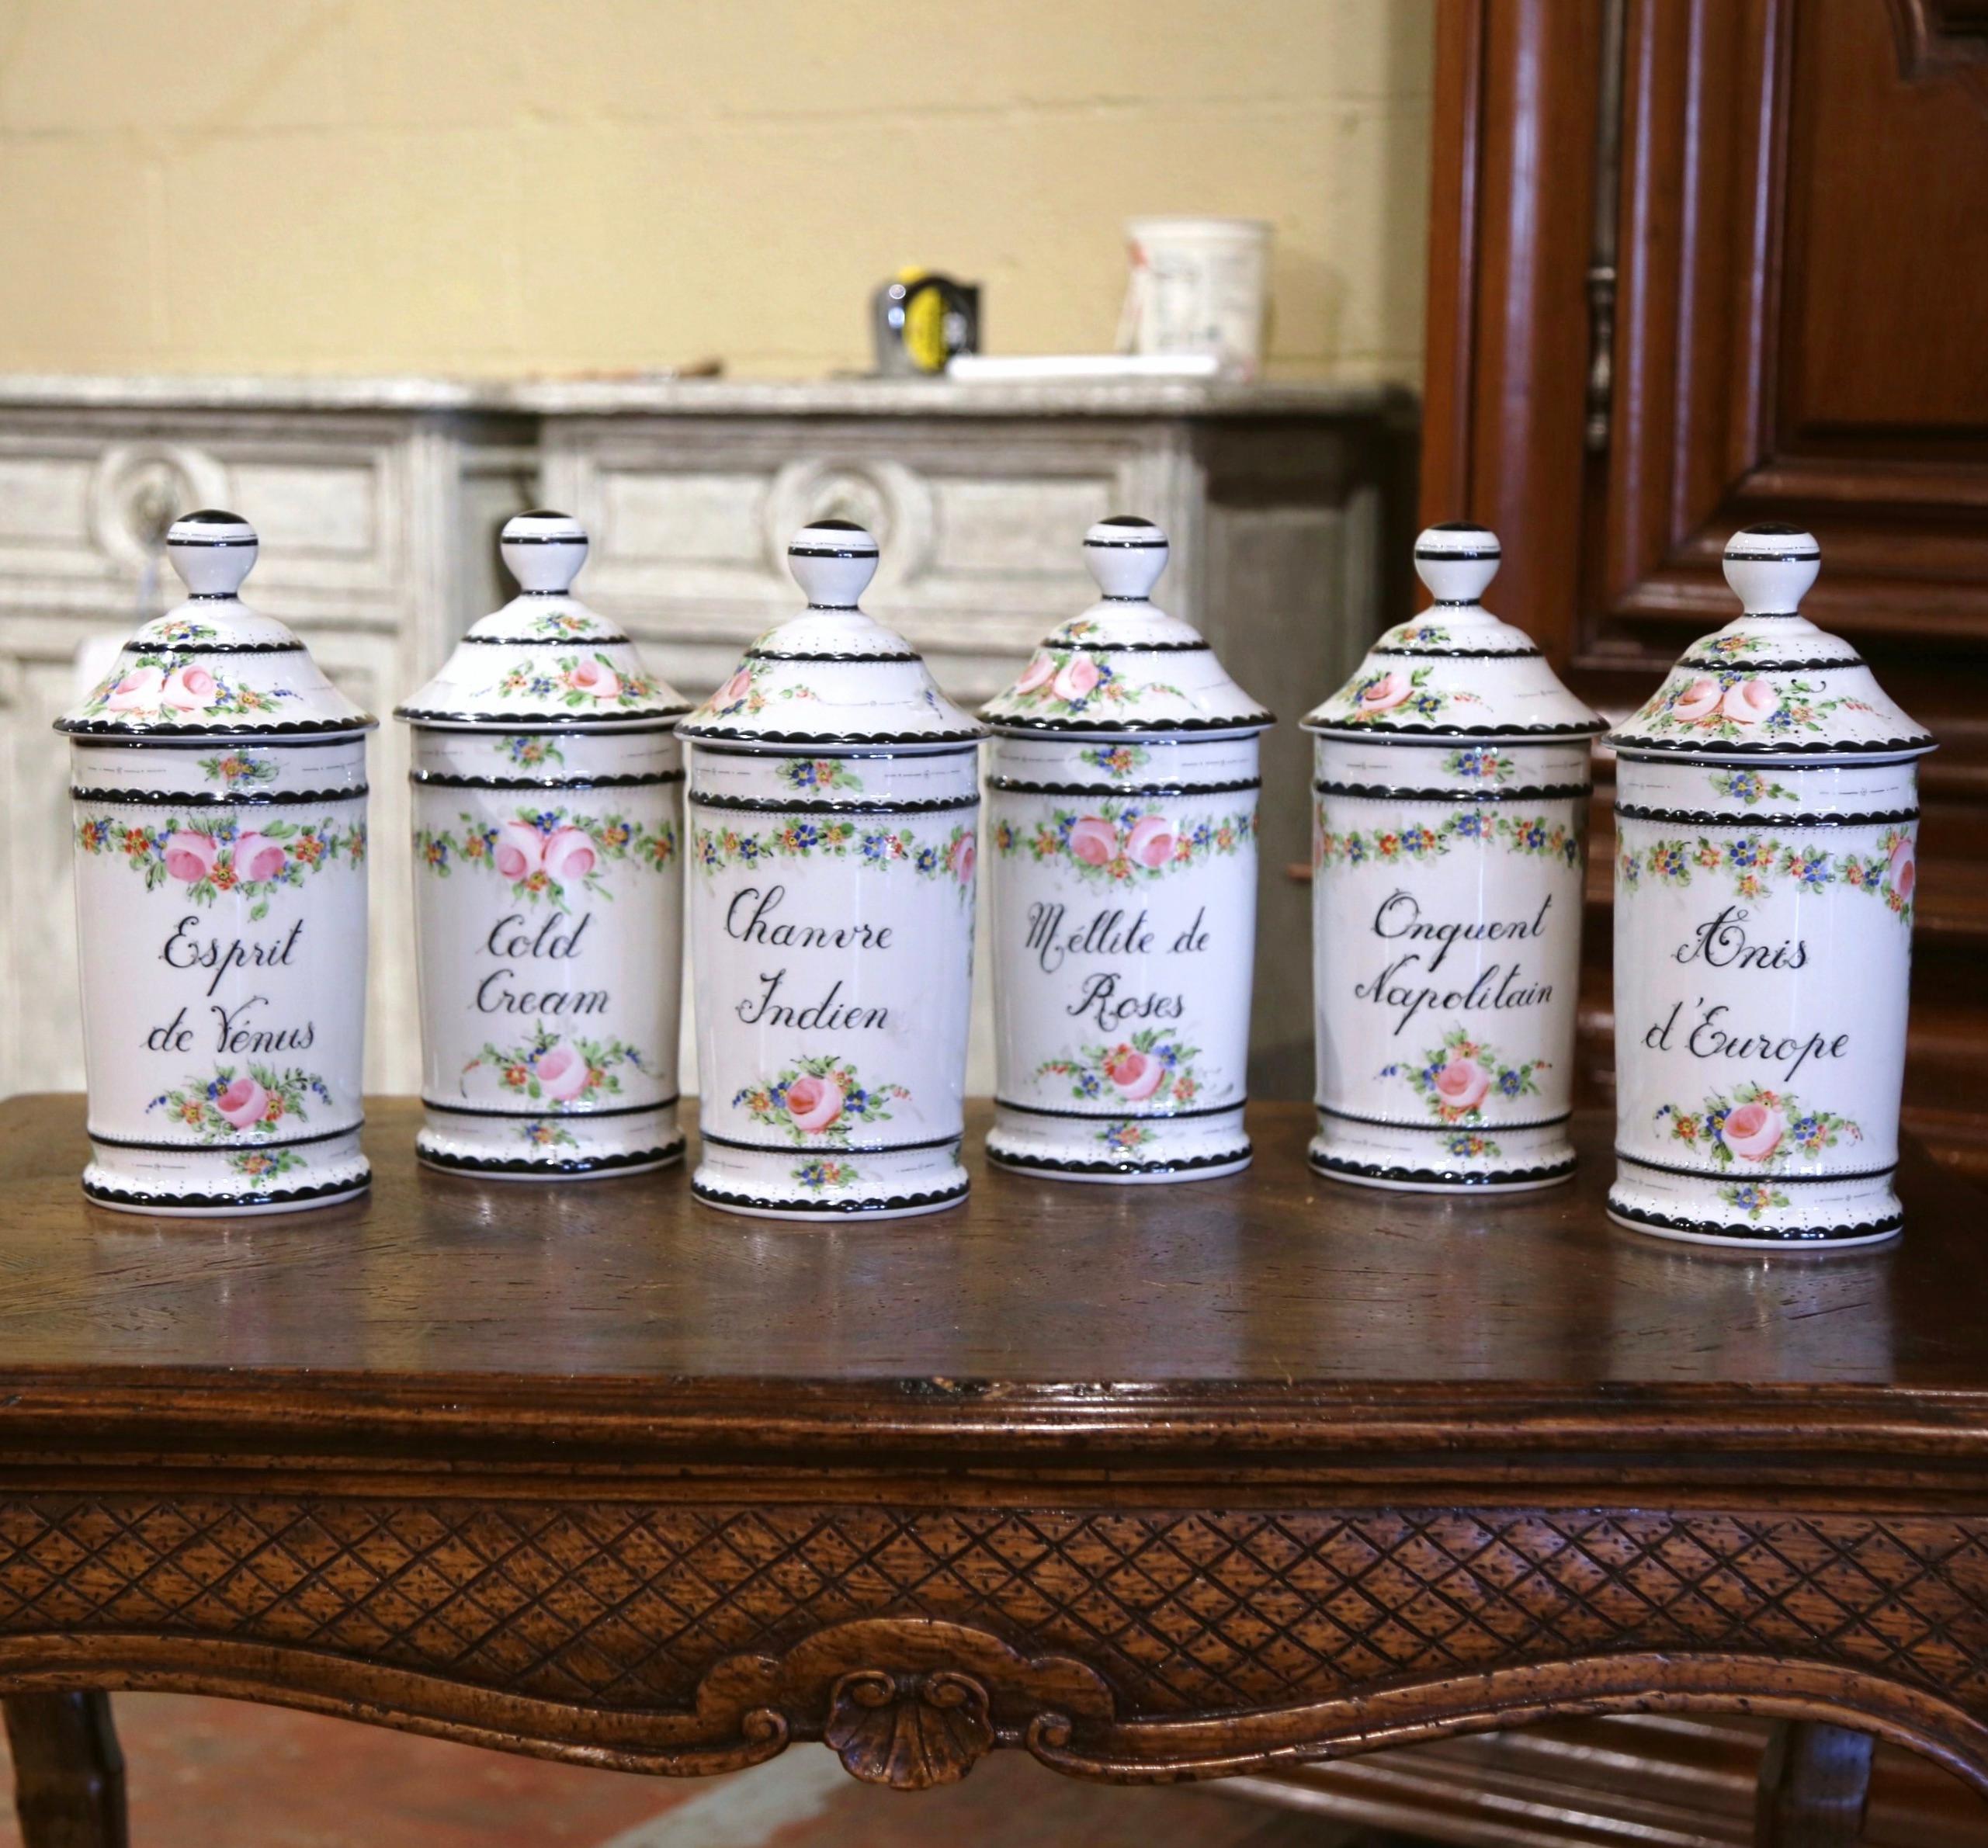 20th Century Midcentury French Limoges Porcelain Apothecary or Pharmacy Jars, Set of 6